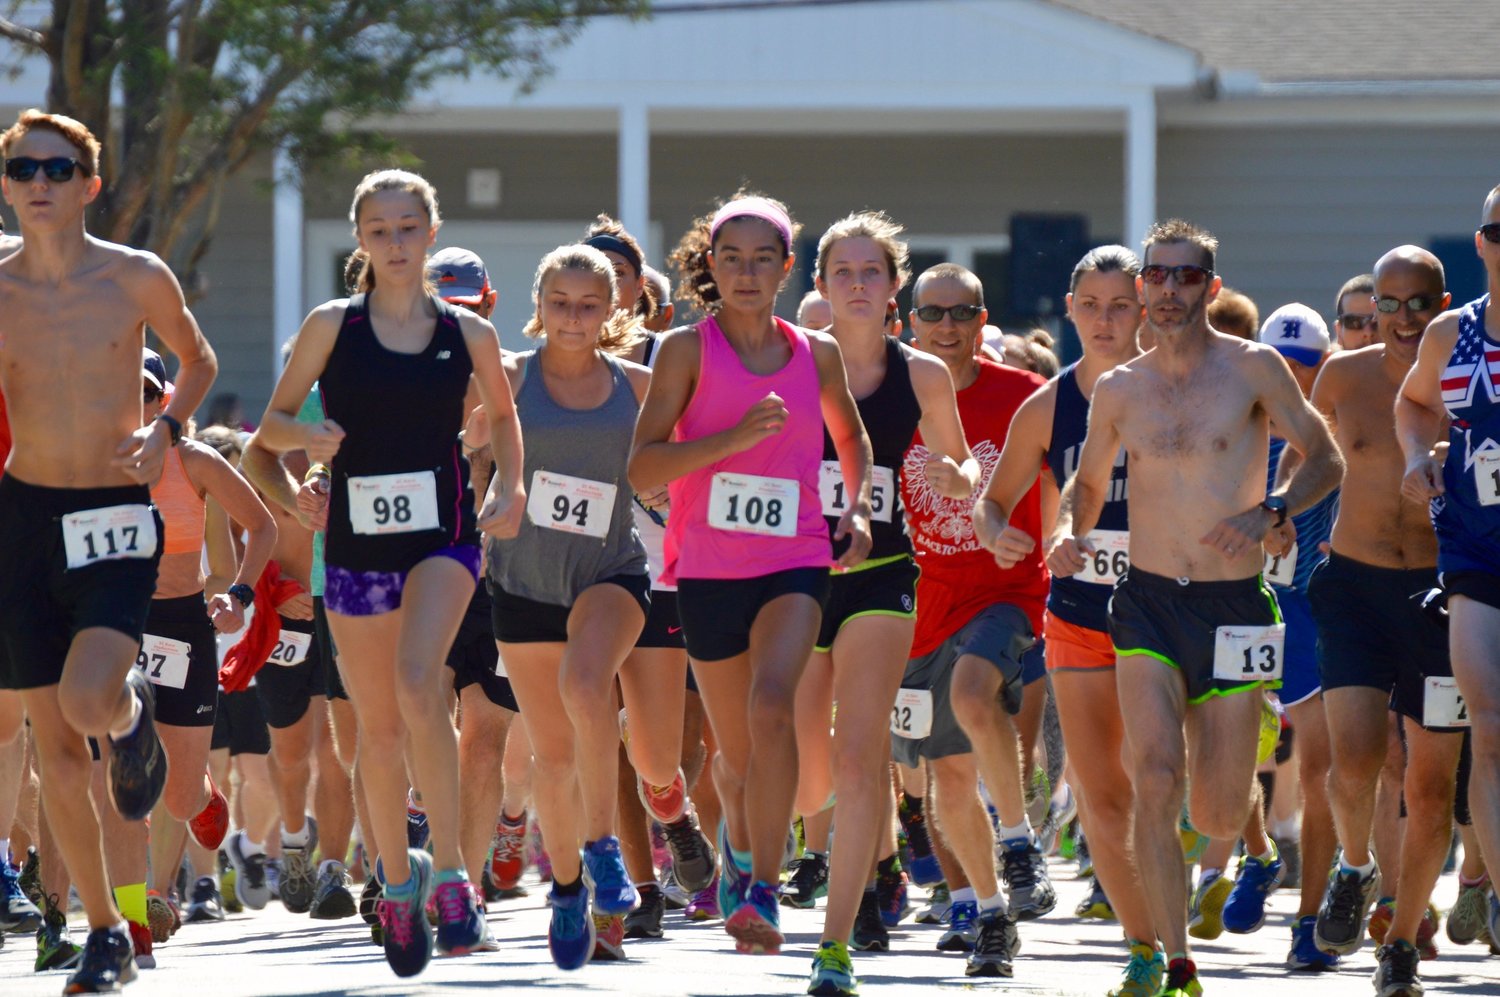 Common Fence Point 5miler on Aug. 18 will be the last